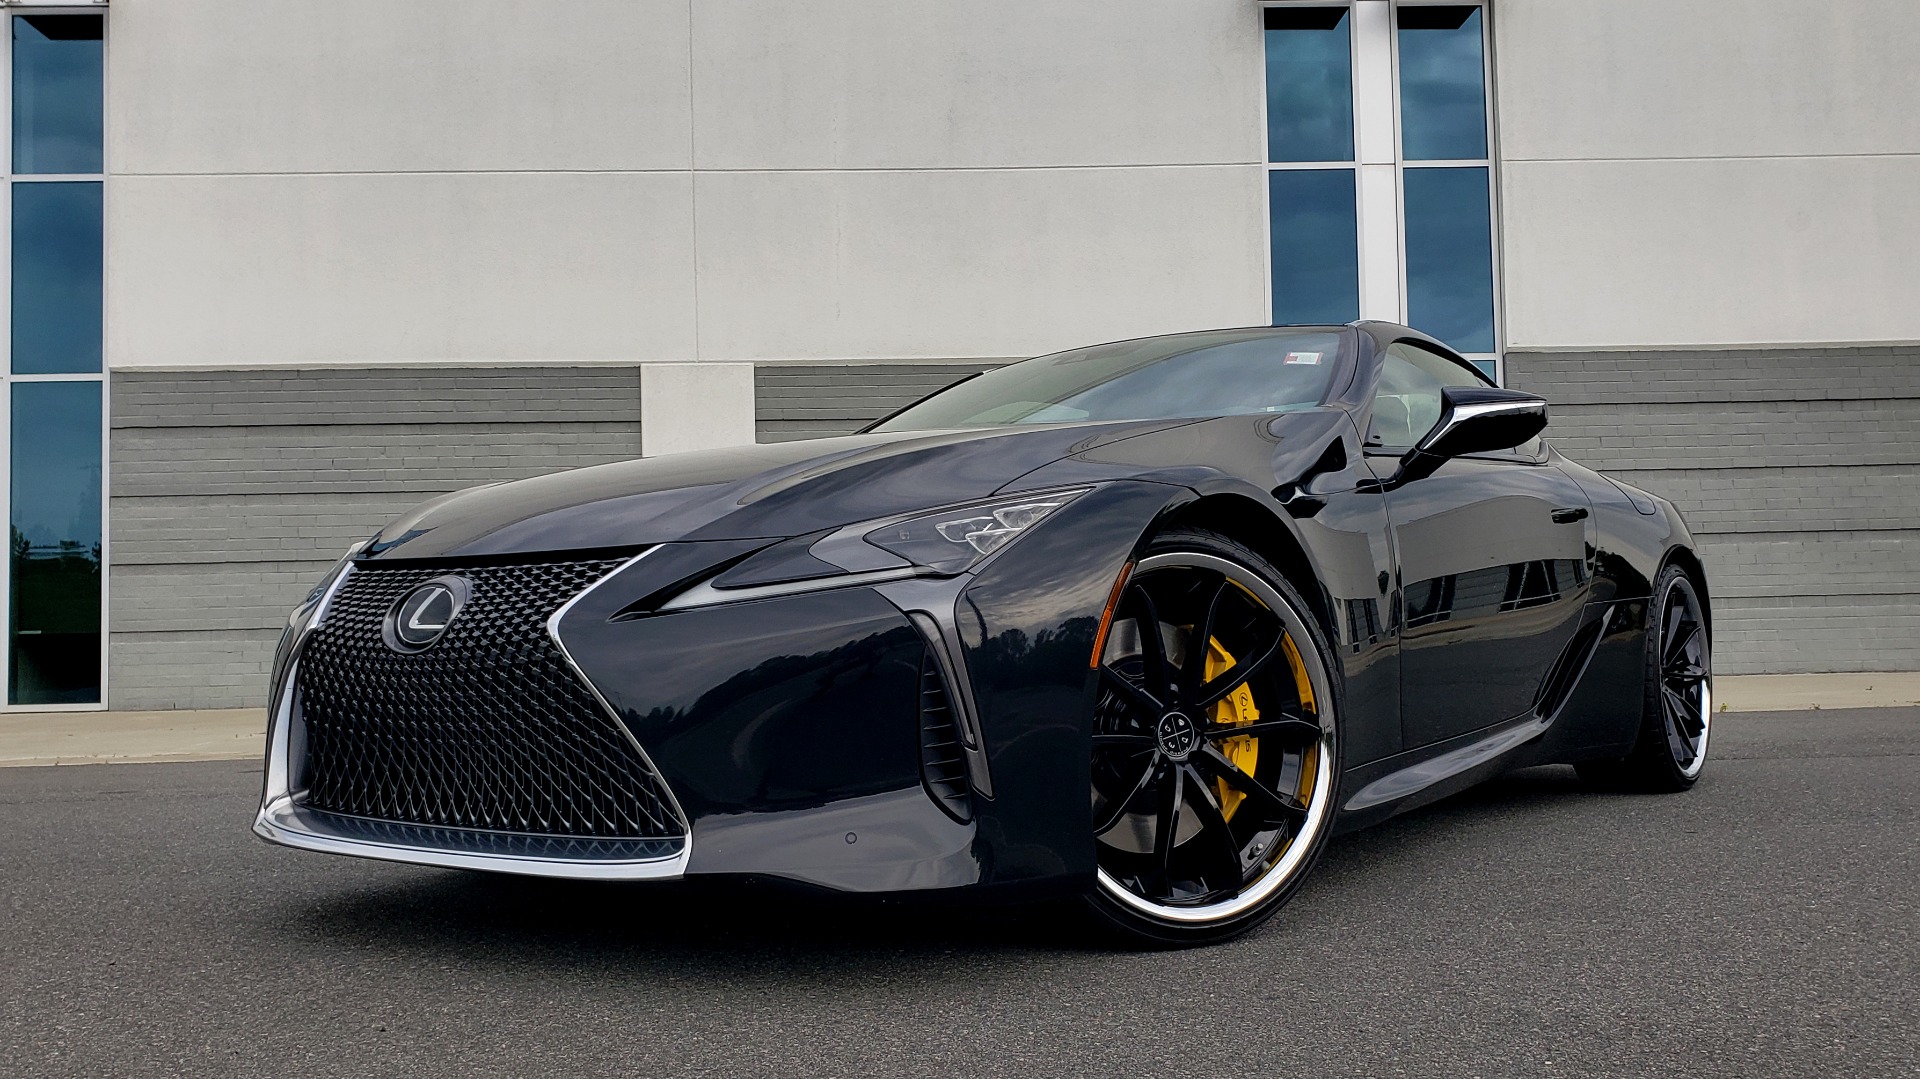 Used 2018 Lexus LC 500 COUPE / 5.0L V8 (471HP) / 10-SPD AUTO / HUD / SUNROOF / REARVIEW for sale Sold at Formula Imports in Charlotte NC 28227 3